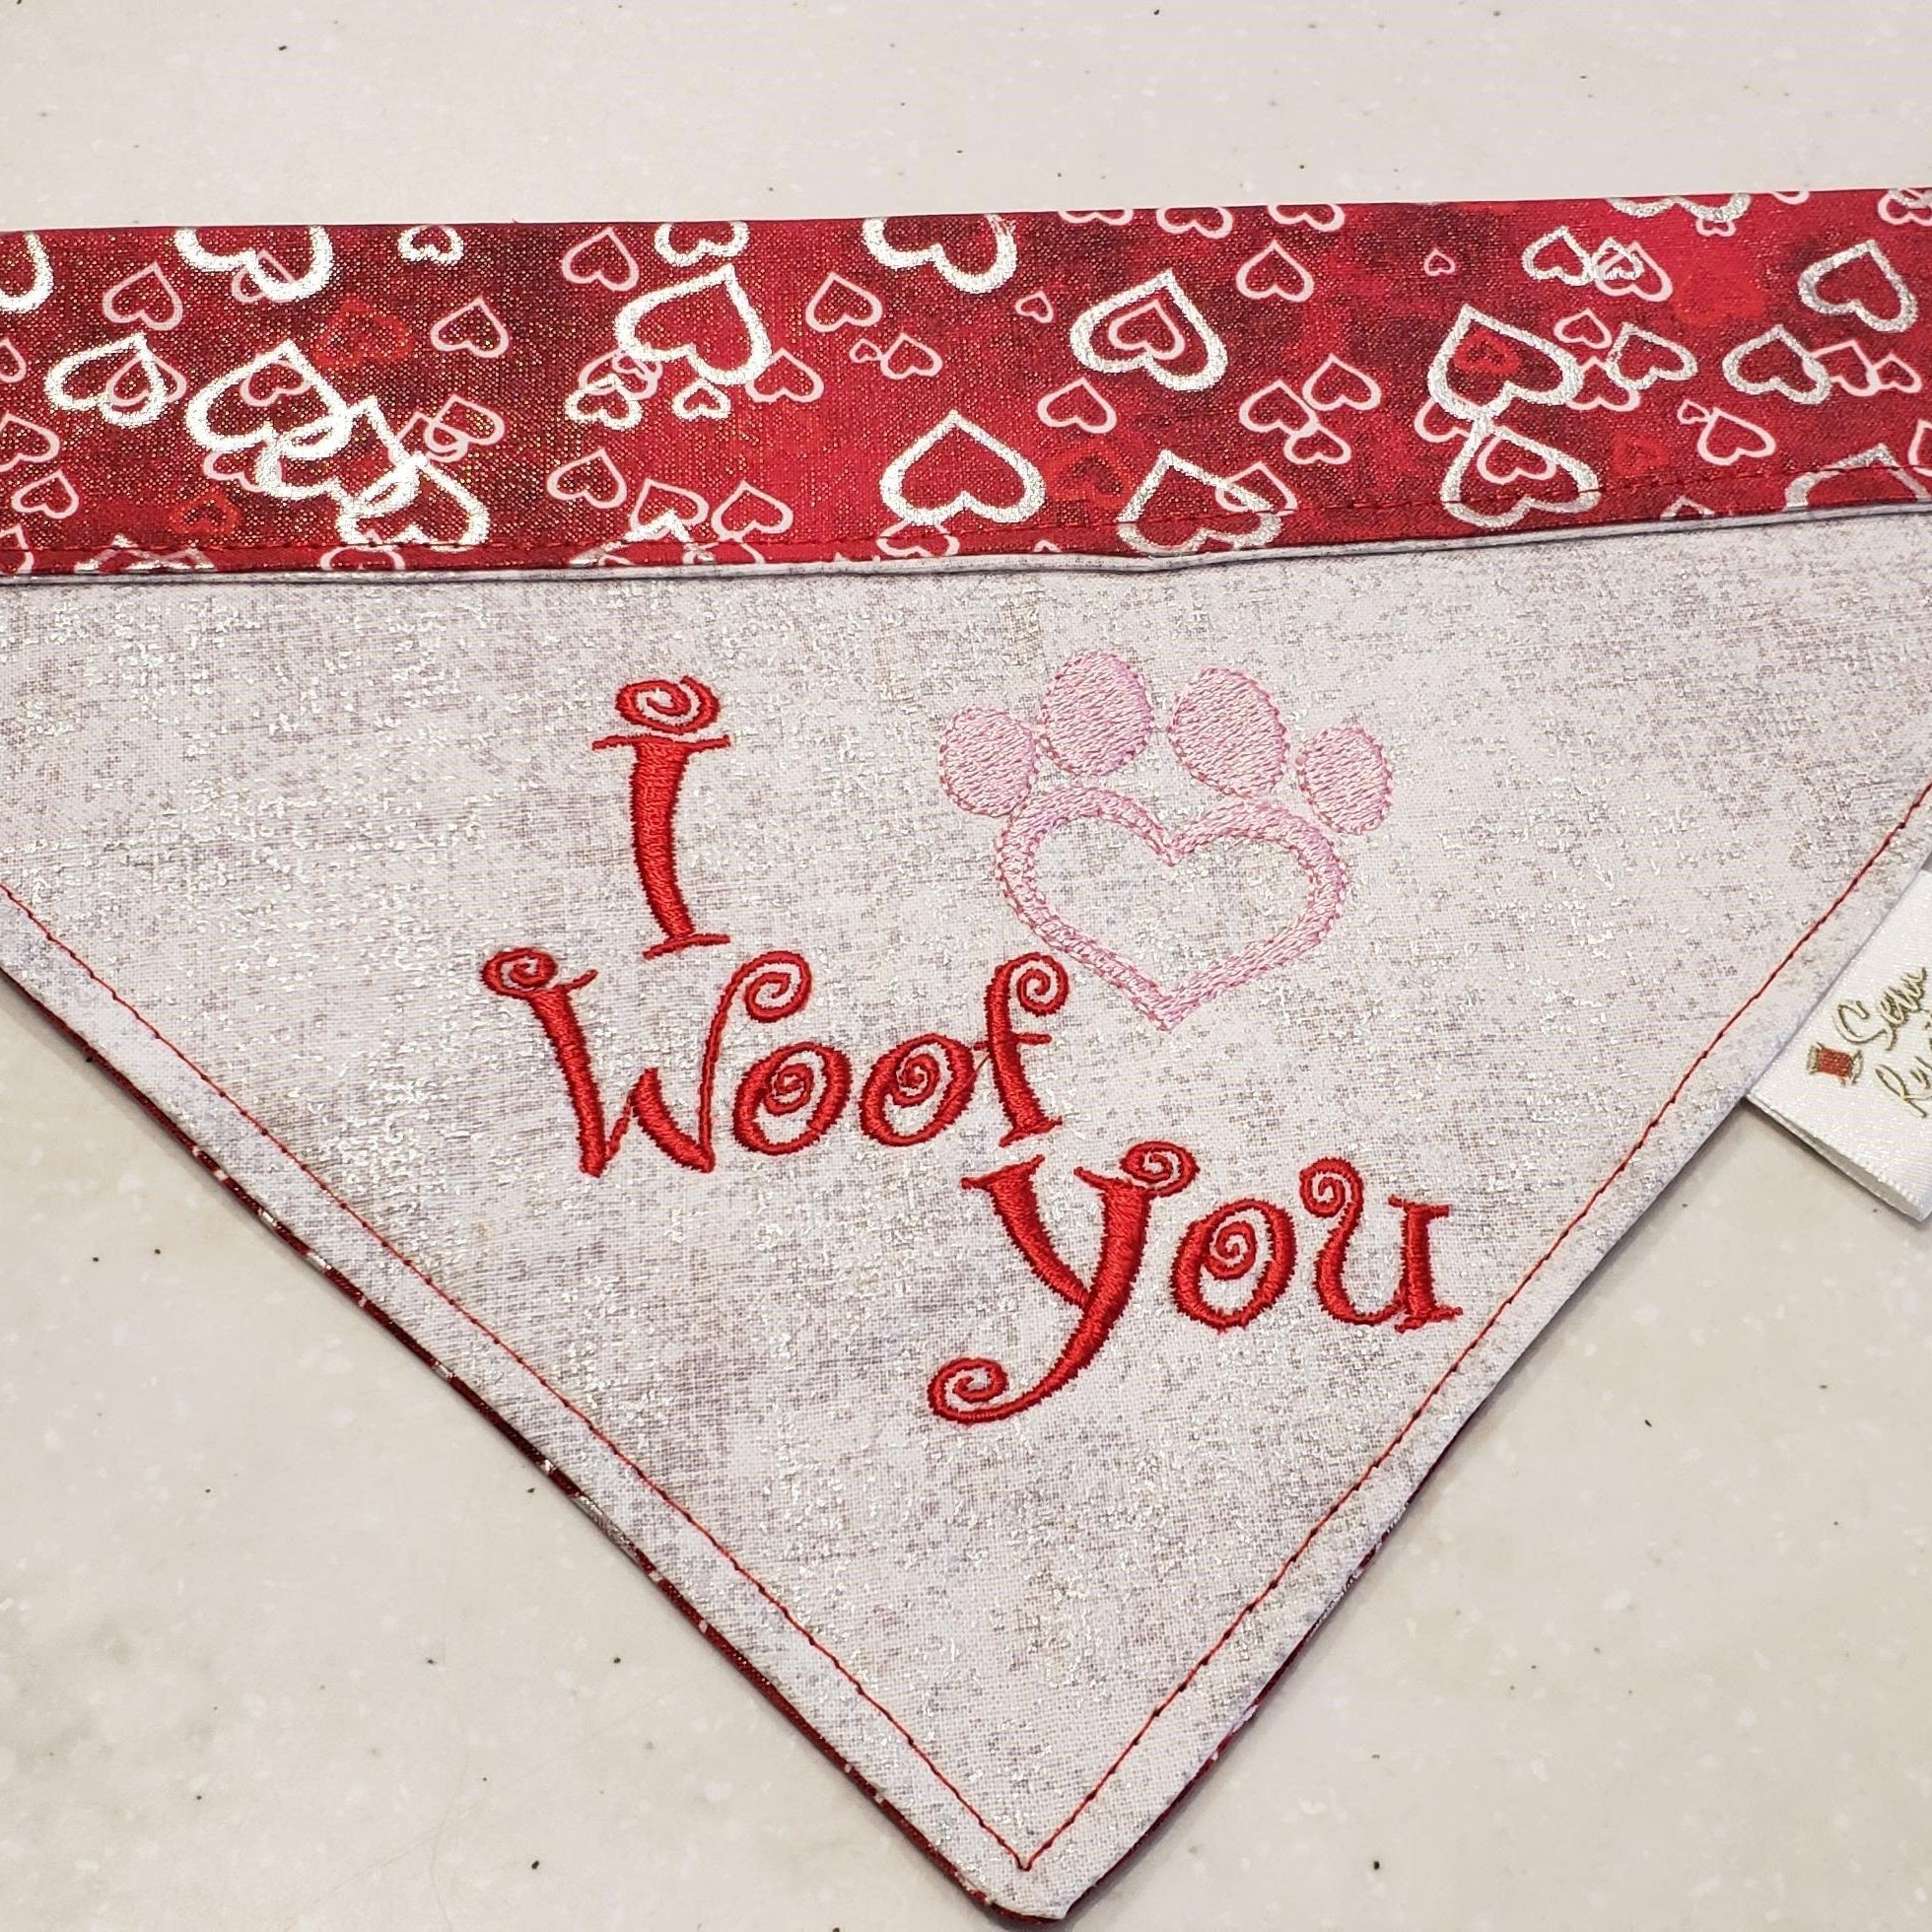 Sewrustic-Embroidered Over The Collar Dog Bandana - Rocky & Maggie's Pet Boutique and Salon